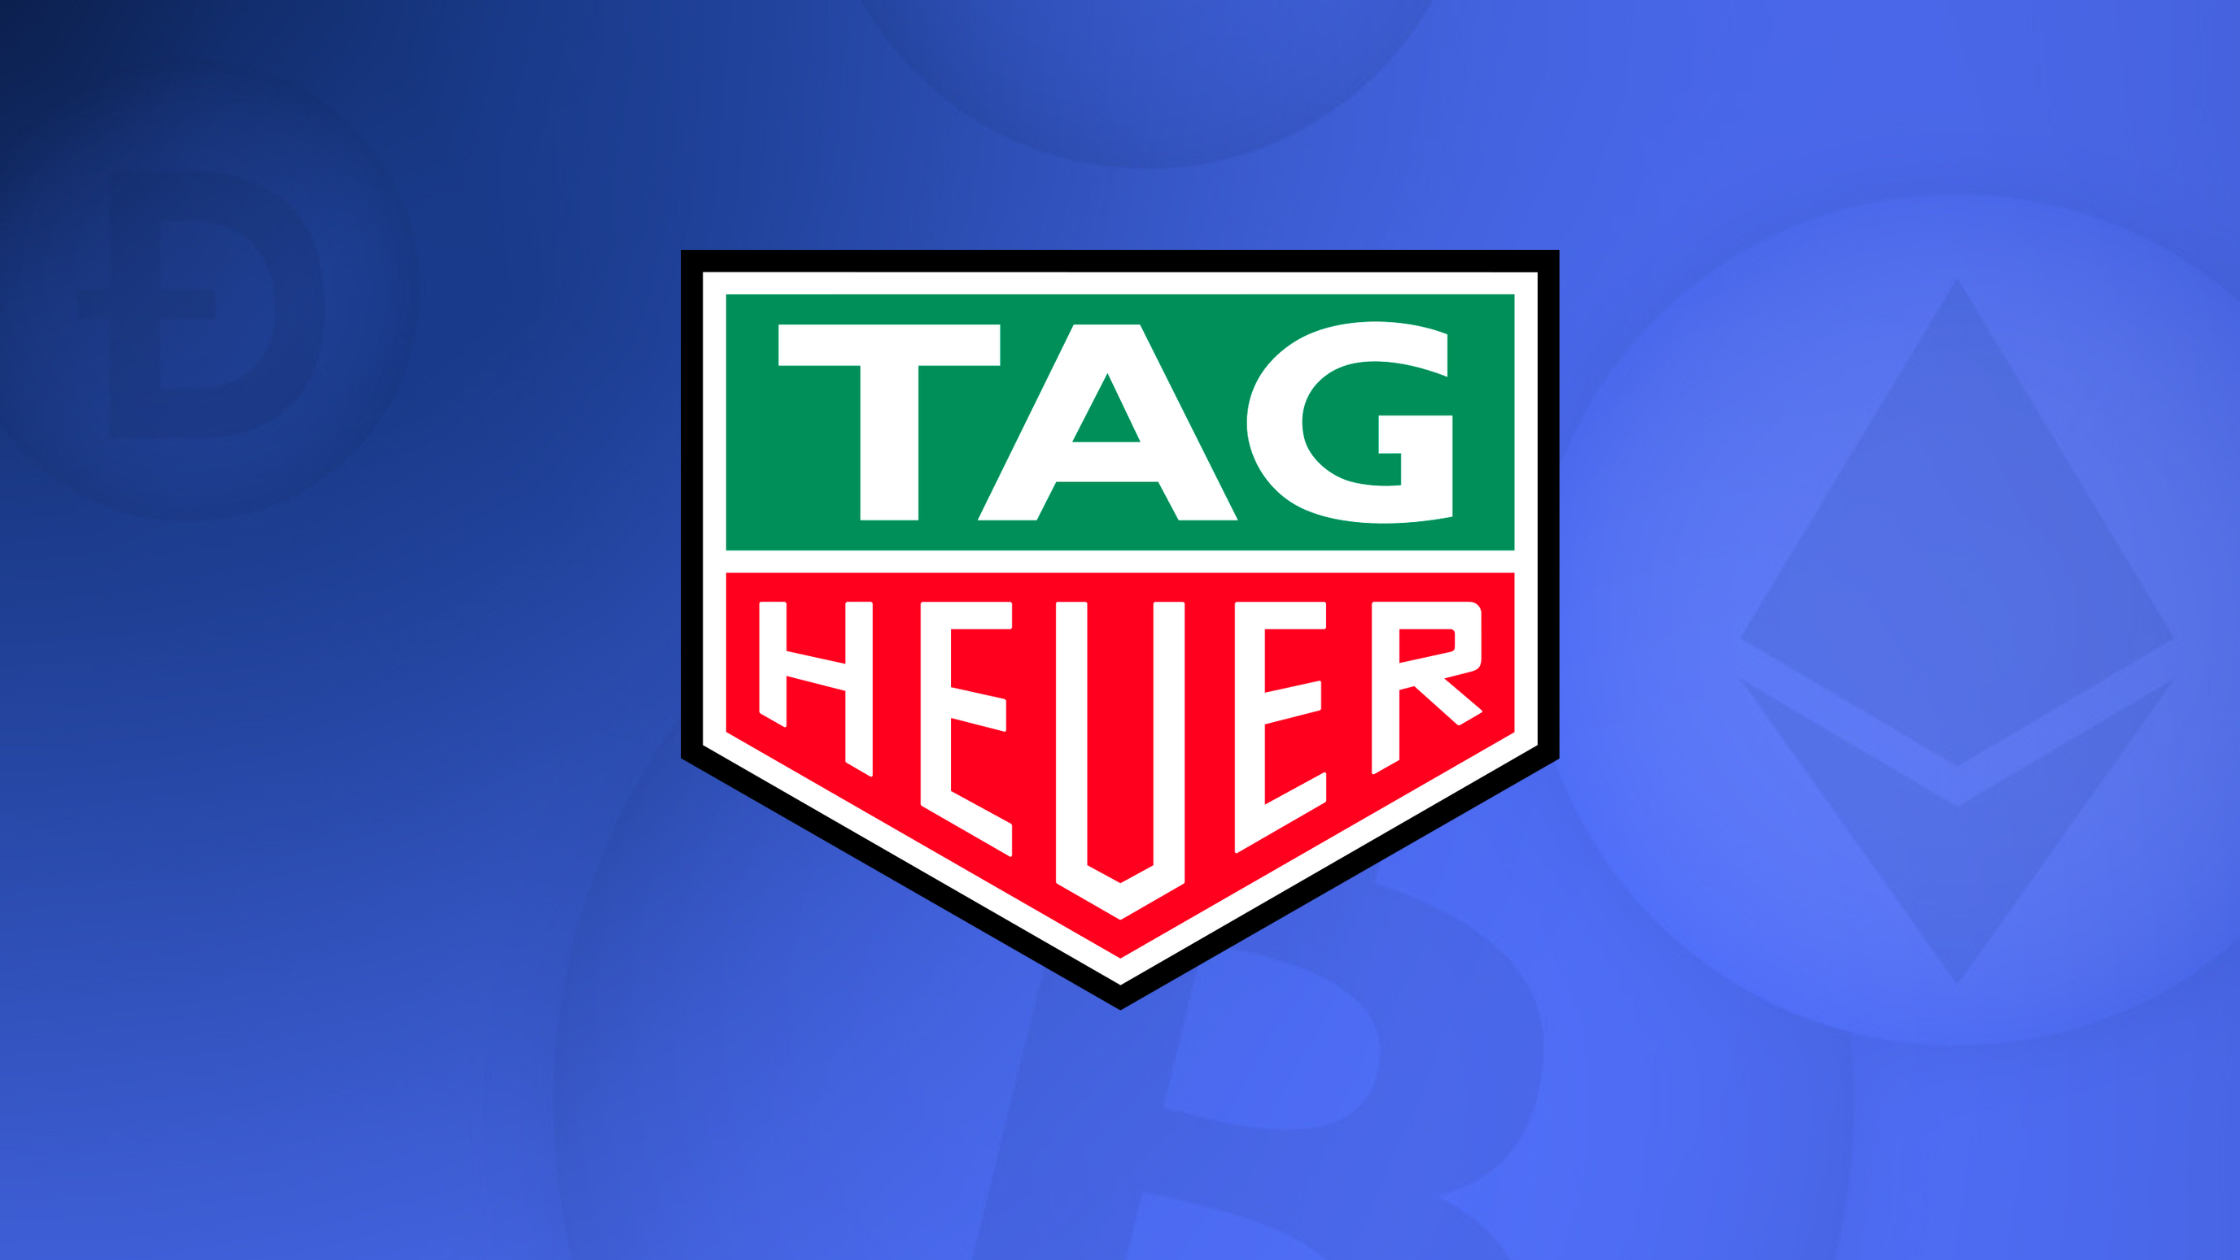 Buy Tag Heuer Watches with Crypto via BitPay